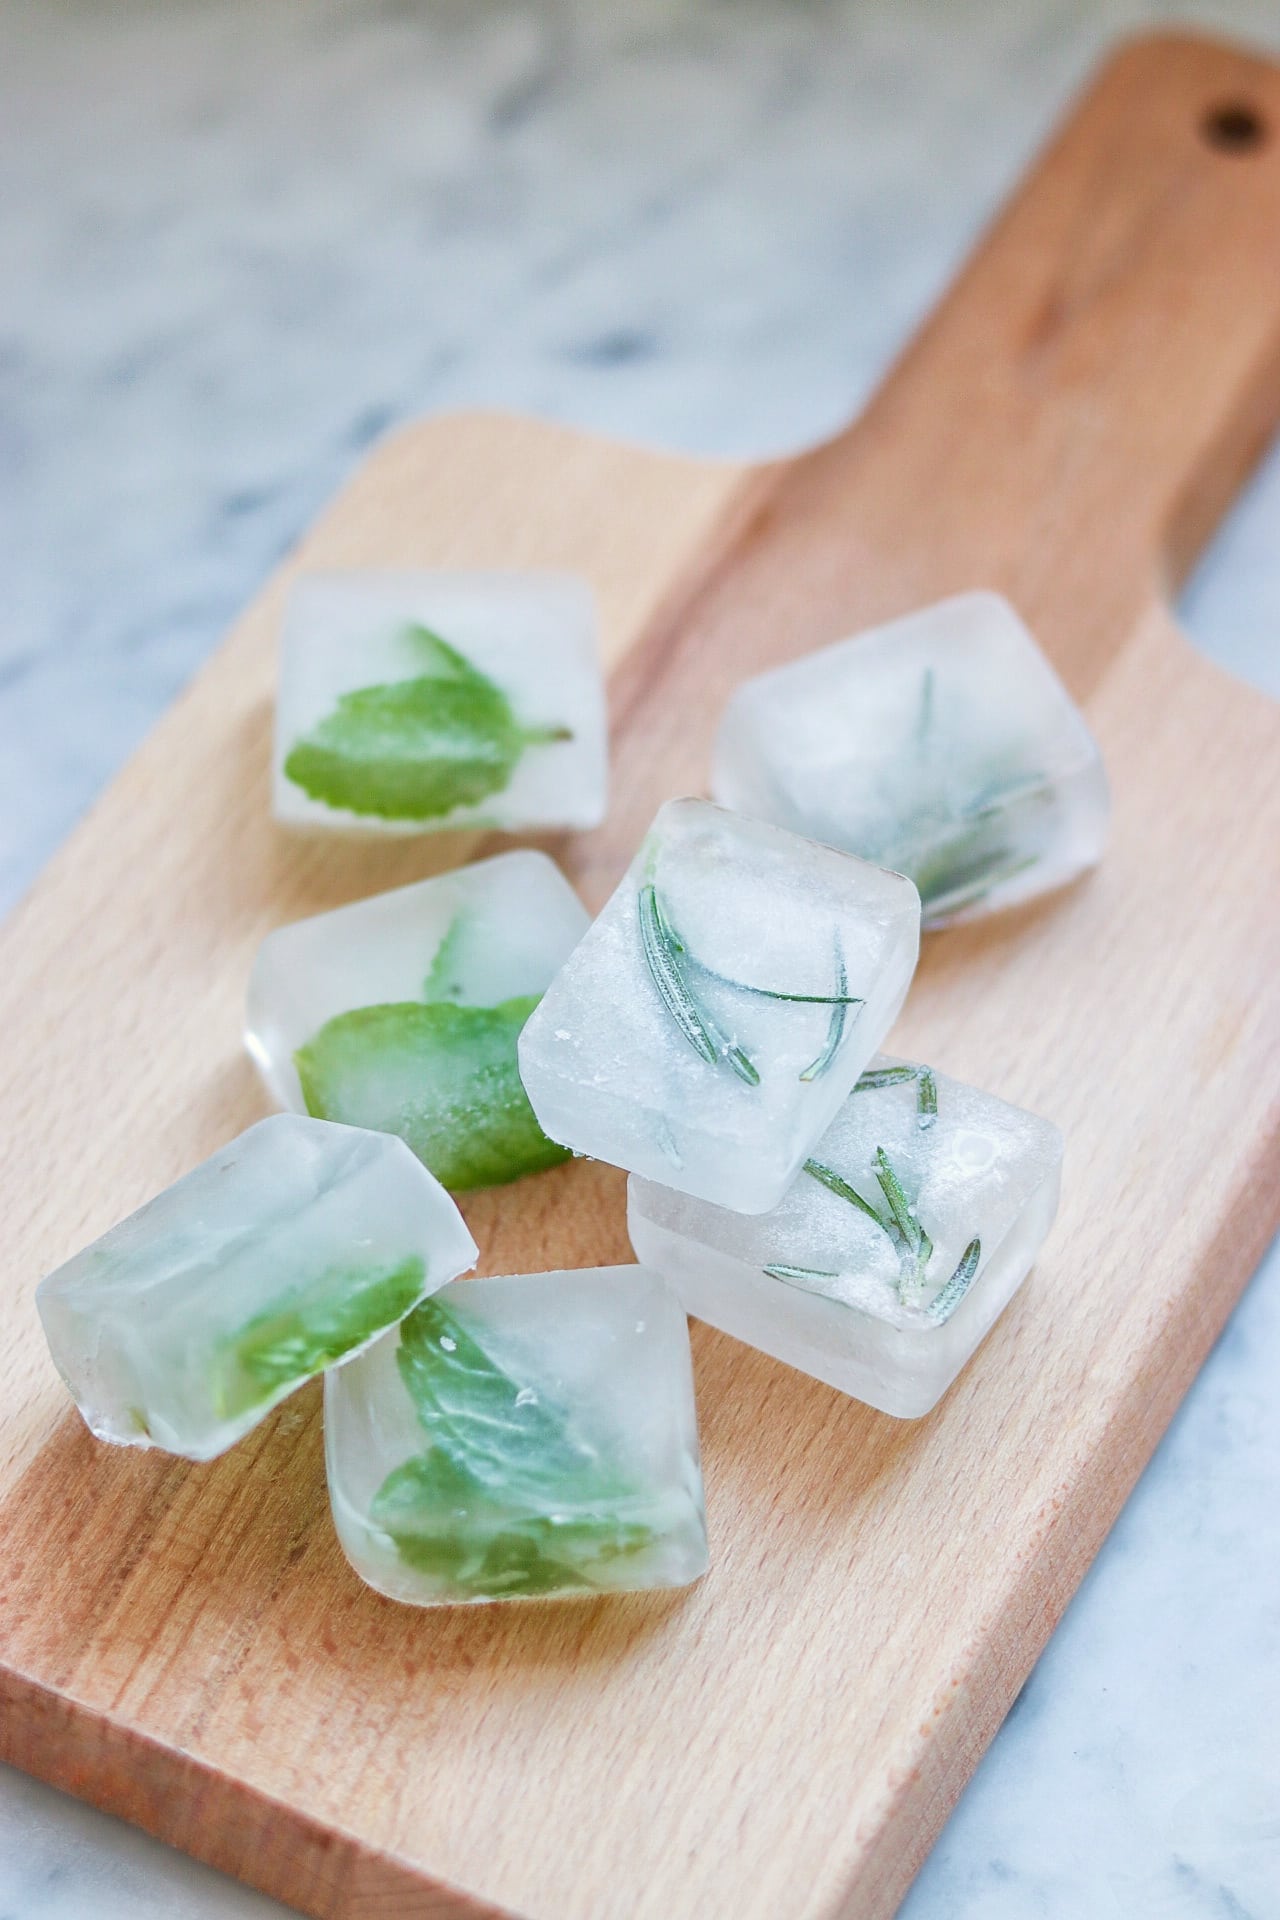 herb ice cubes for drinks (mint ice cubes and rosemary ice cubes)